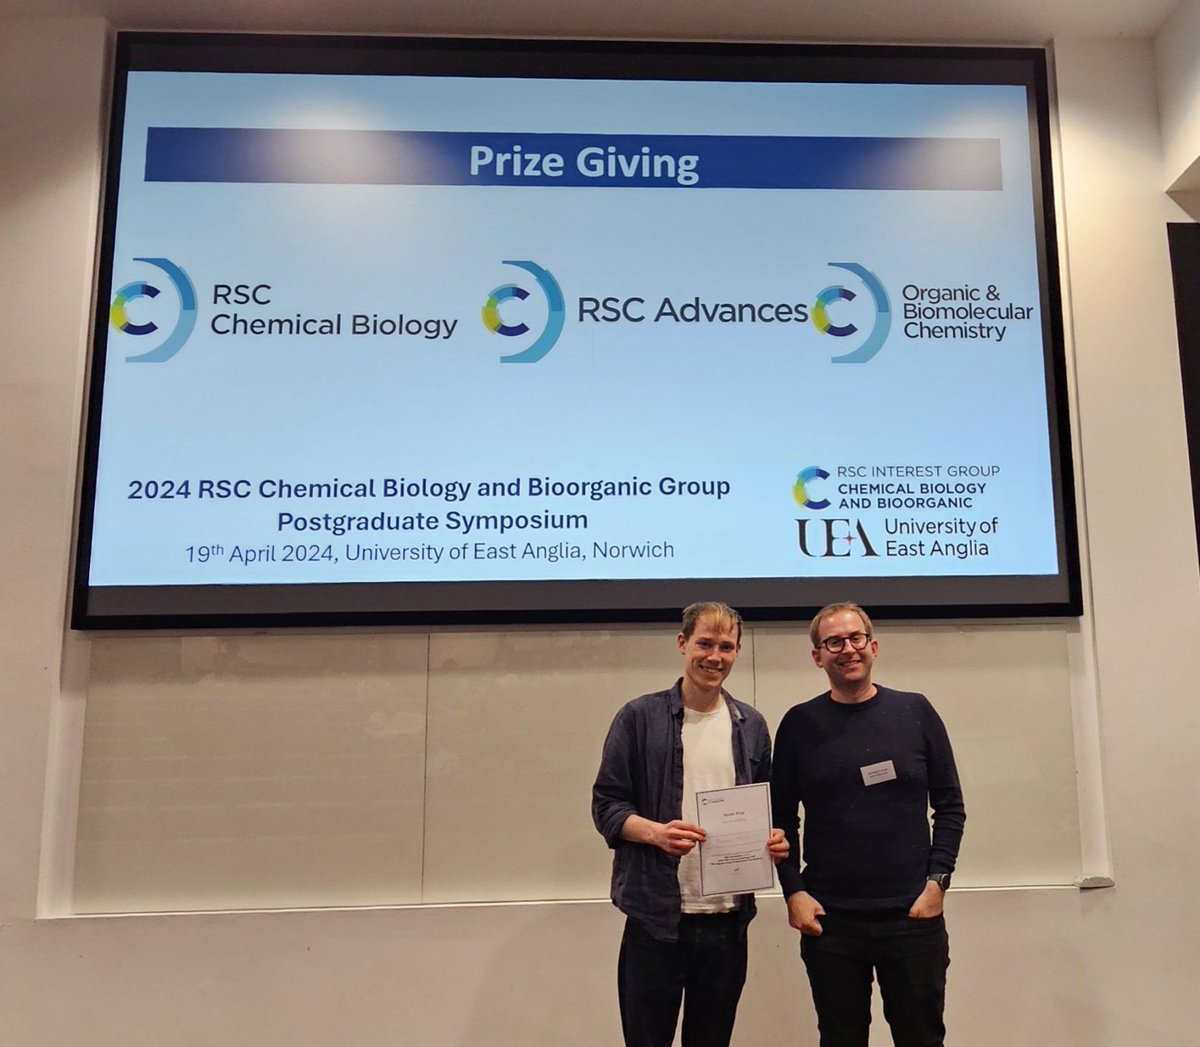 Congratulations to Thomas E. Mills for receiving the prize for Best Poster, sponsored by RSC Advances, at the RSC Chemical Biology and Bioorganic Group Postgraduate Symposium held at the University of East Anglia!